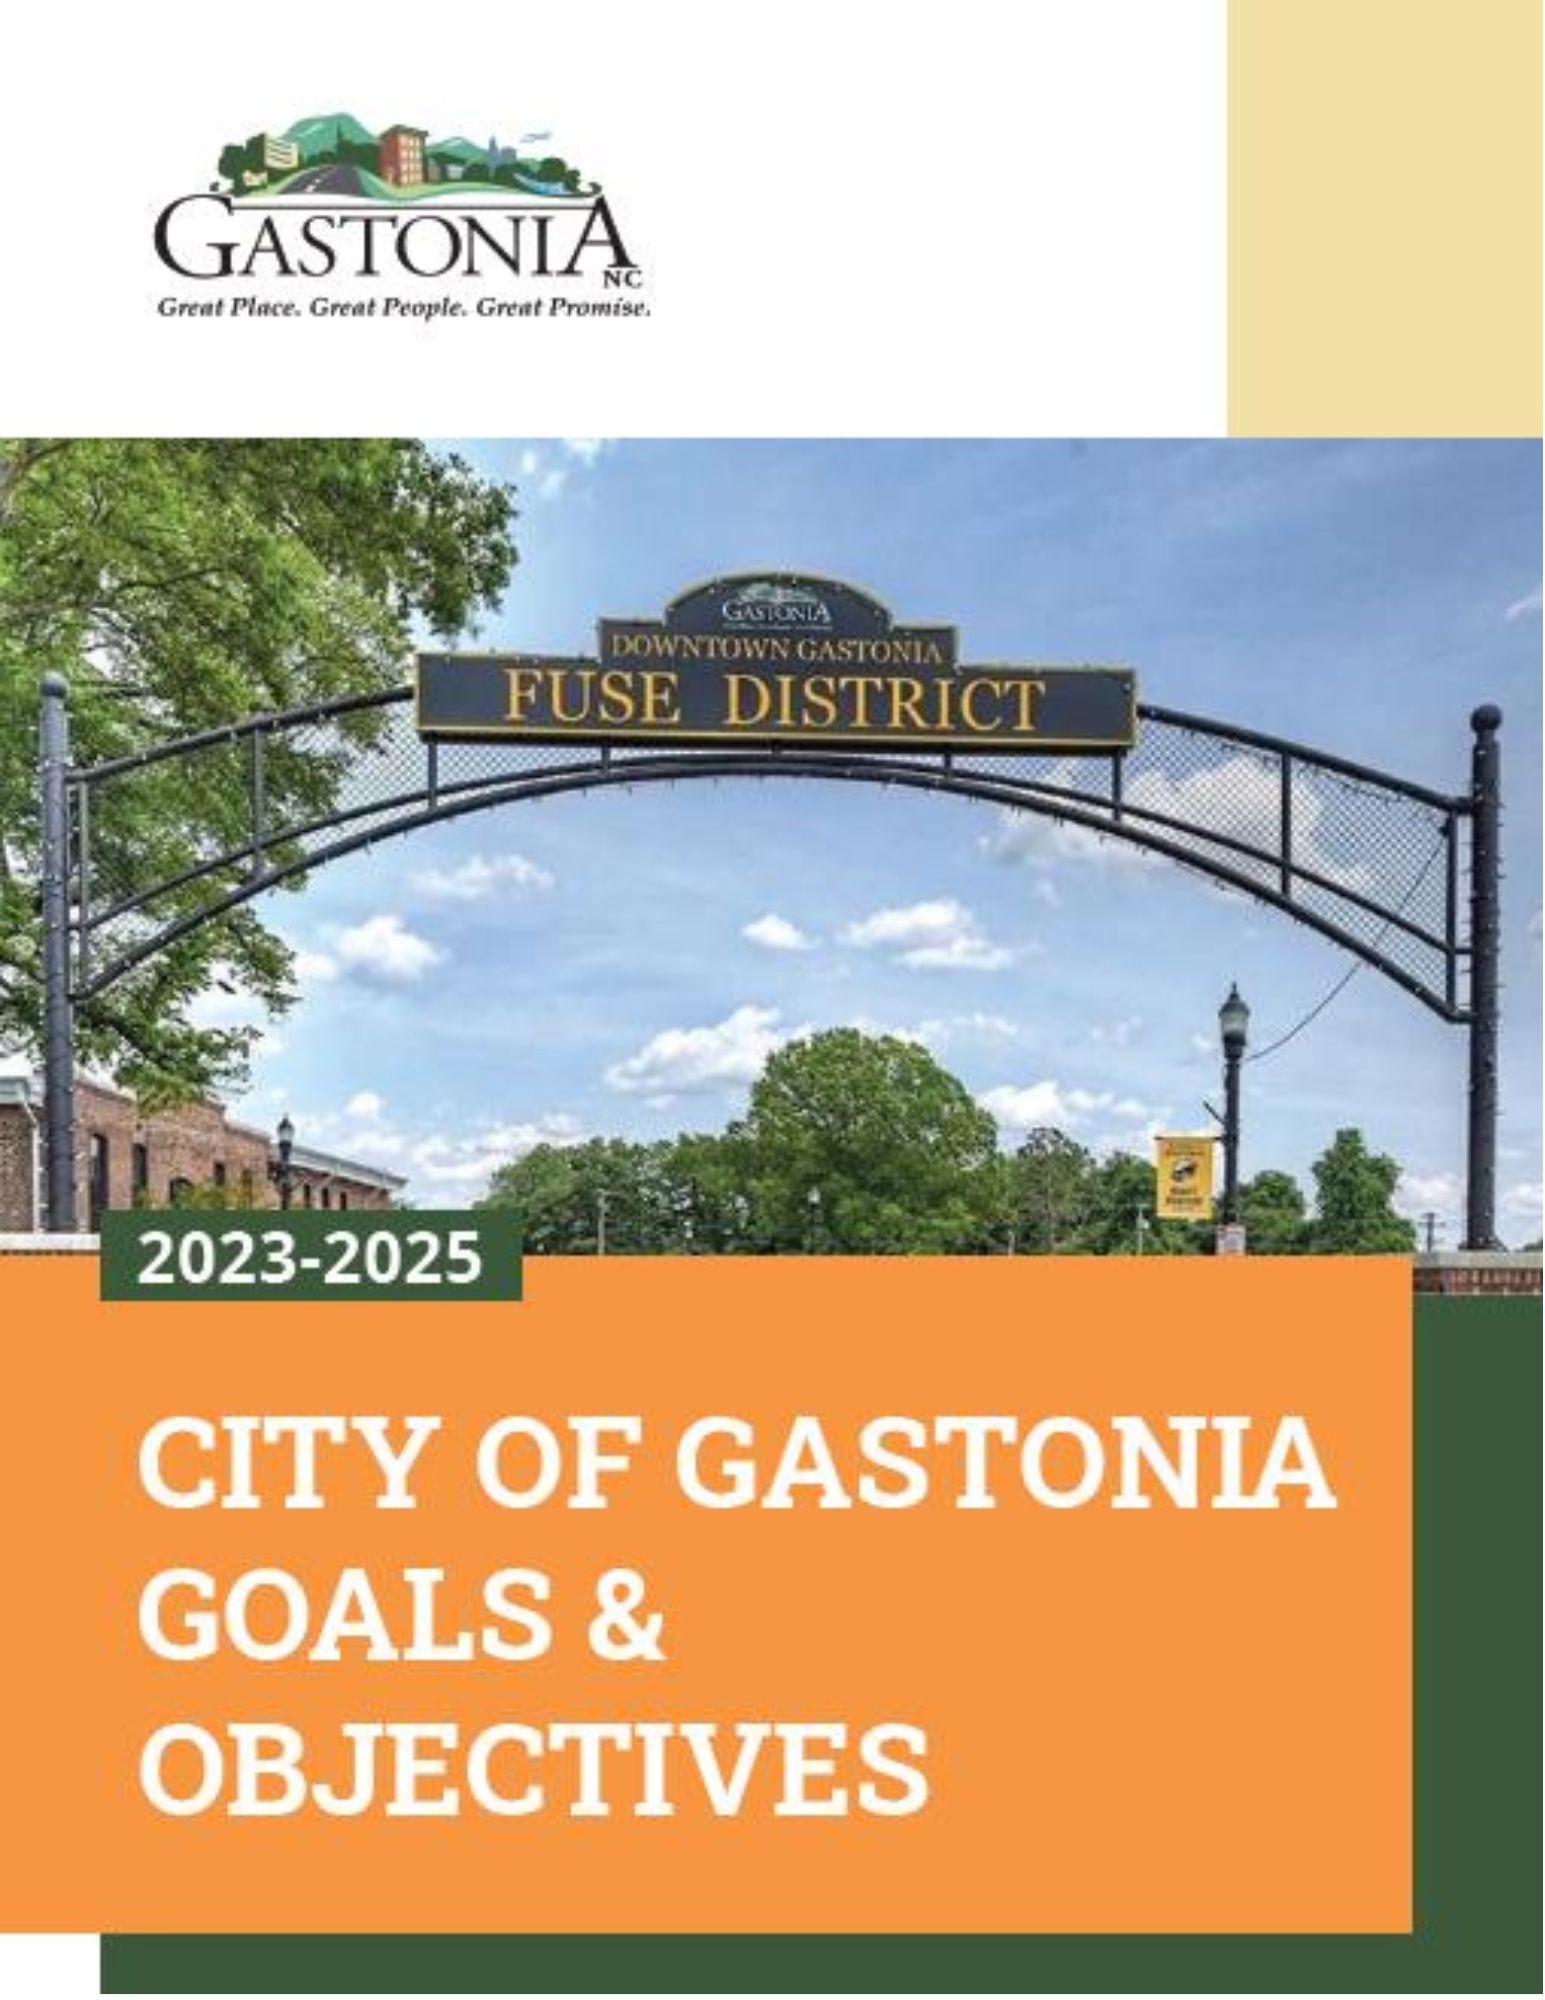 Graphic design cover of City of Gastonia Goals & Objectives document